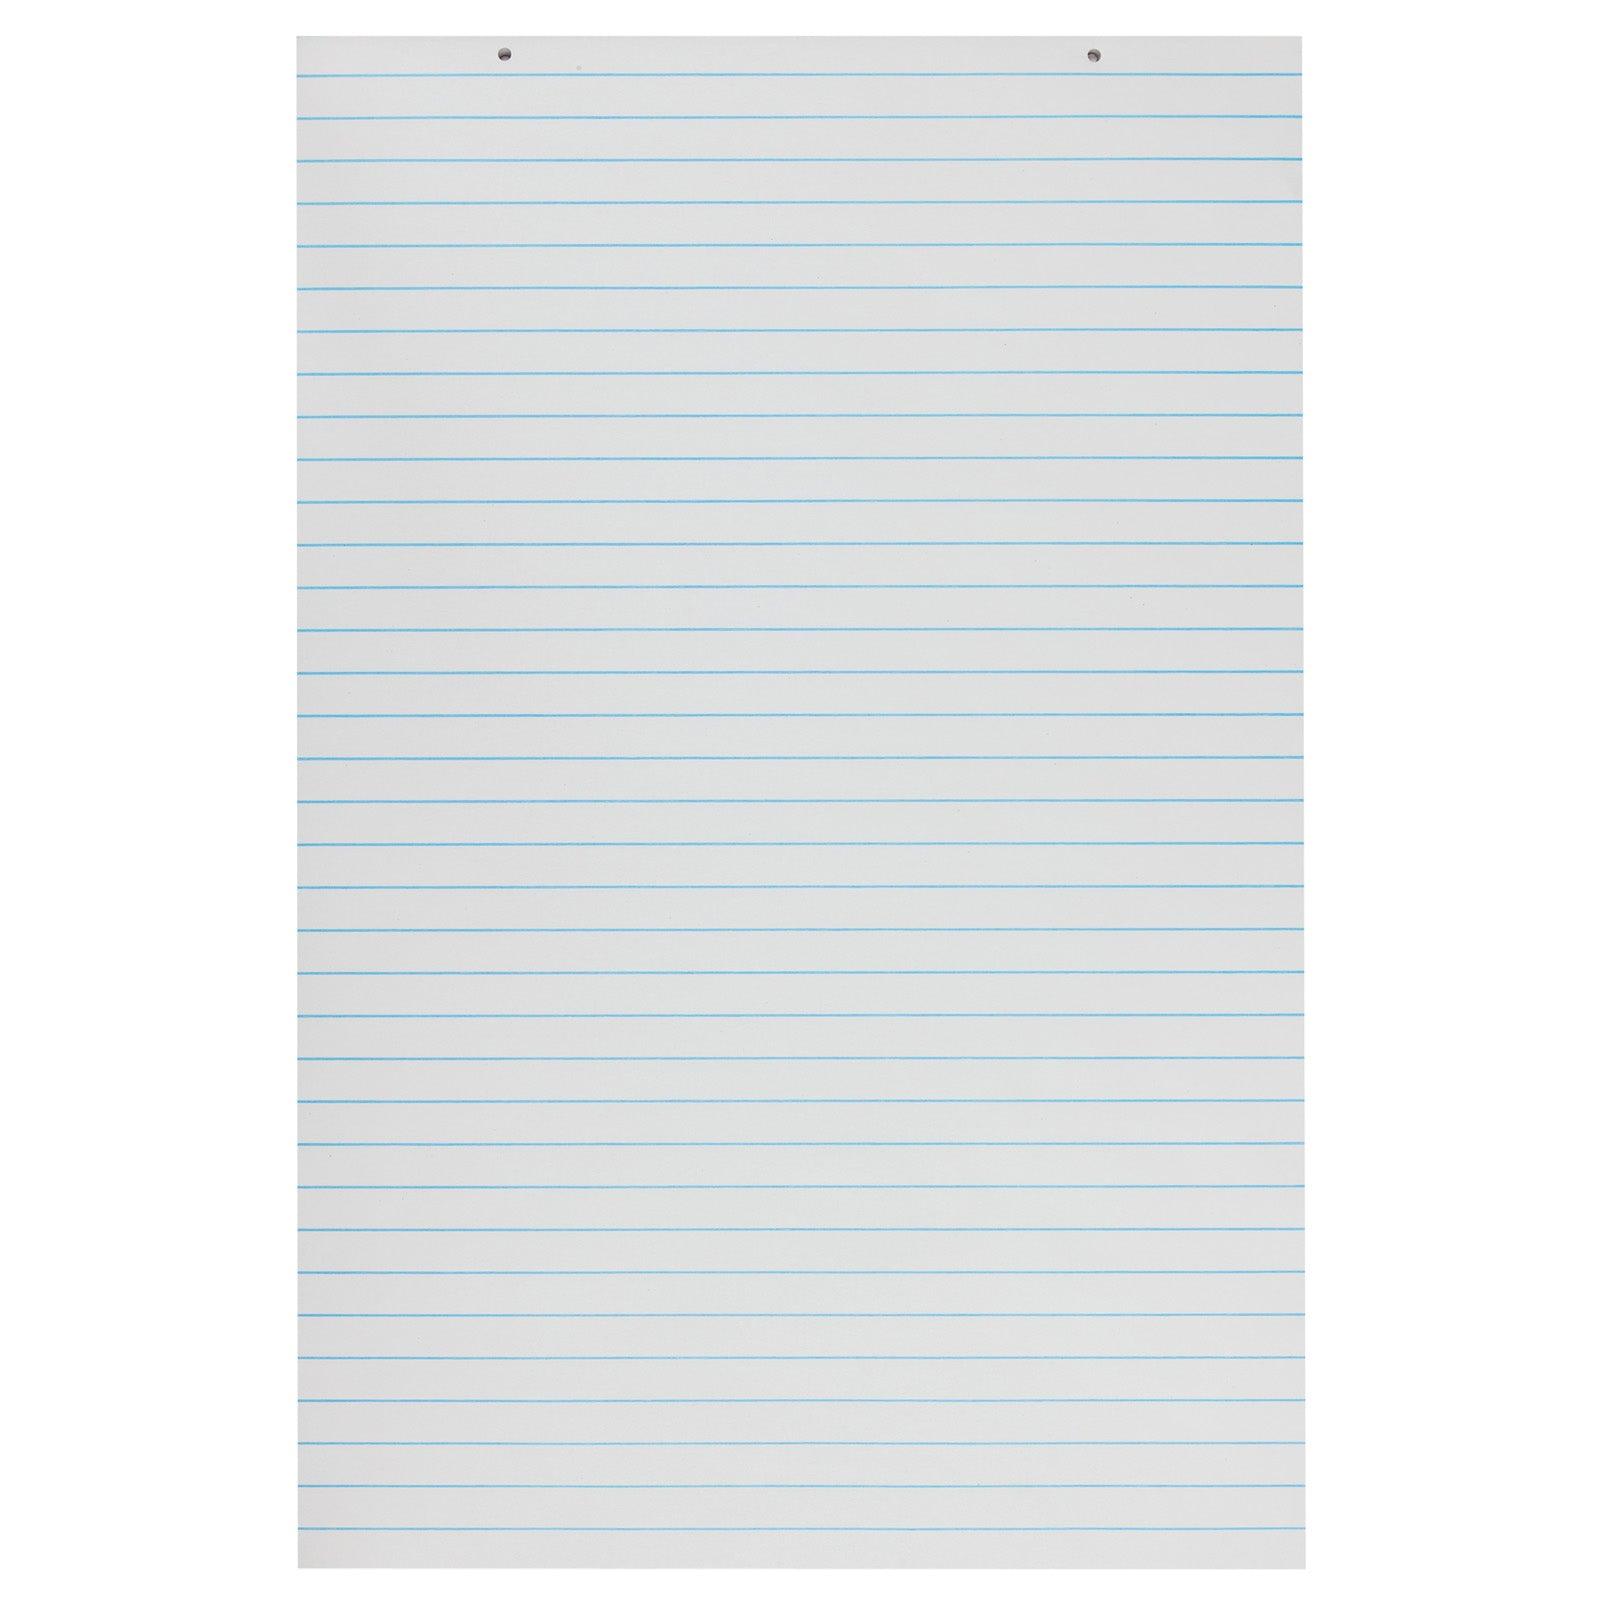 Primary Chart Pad, White, 1" Ruled Short Way, 24" x 36", 100 Sheets - Loomini